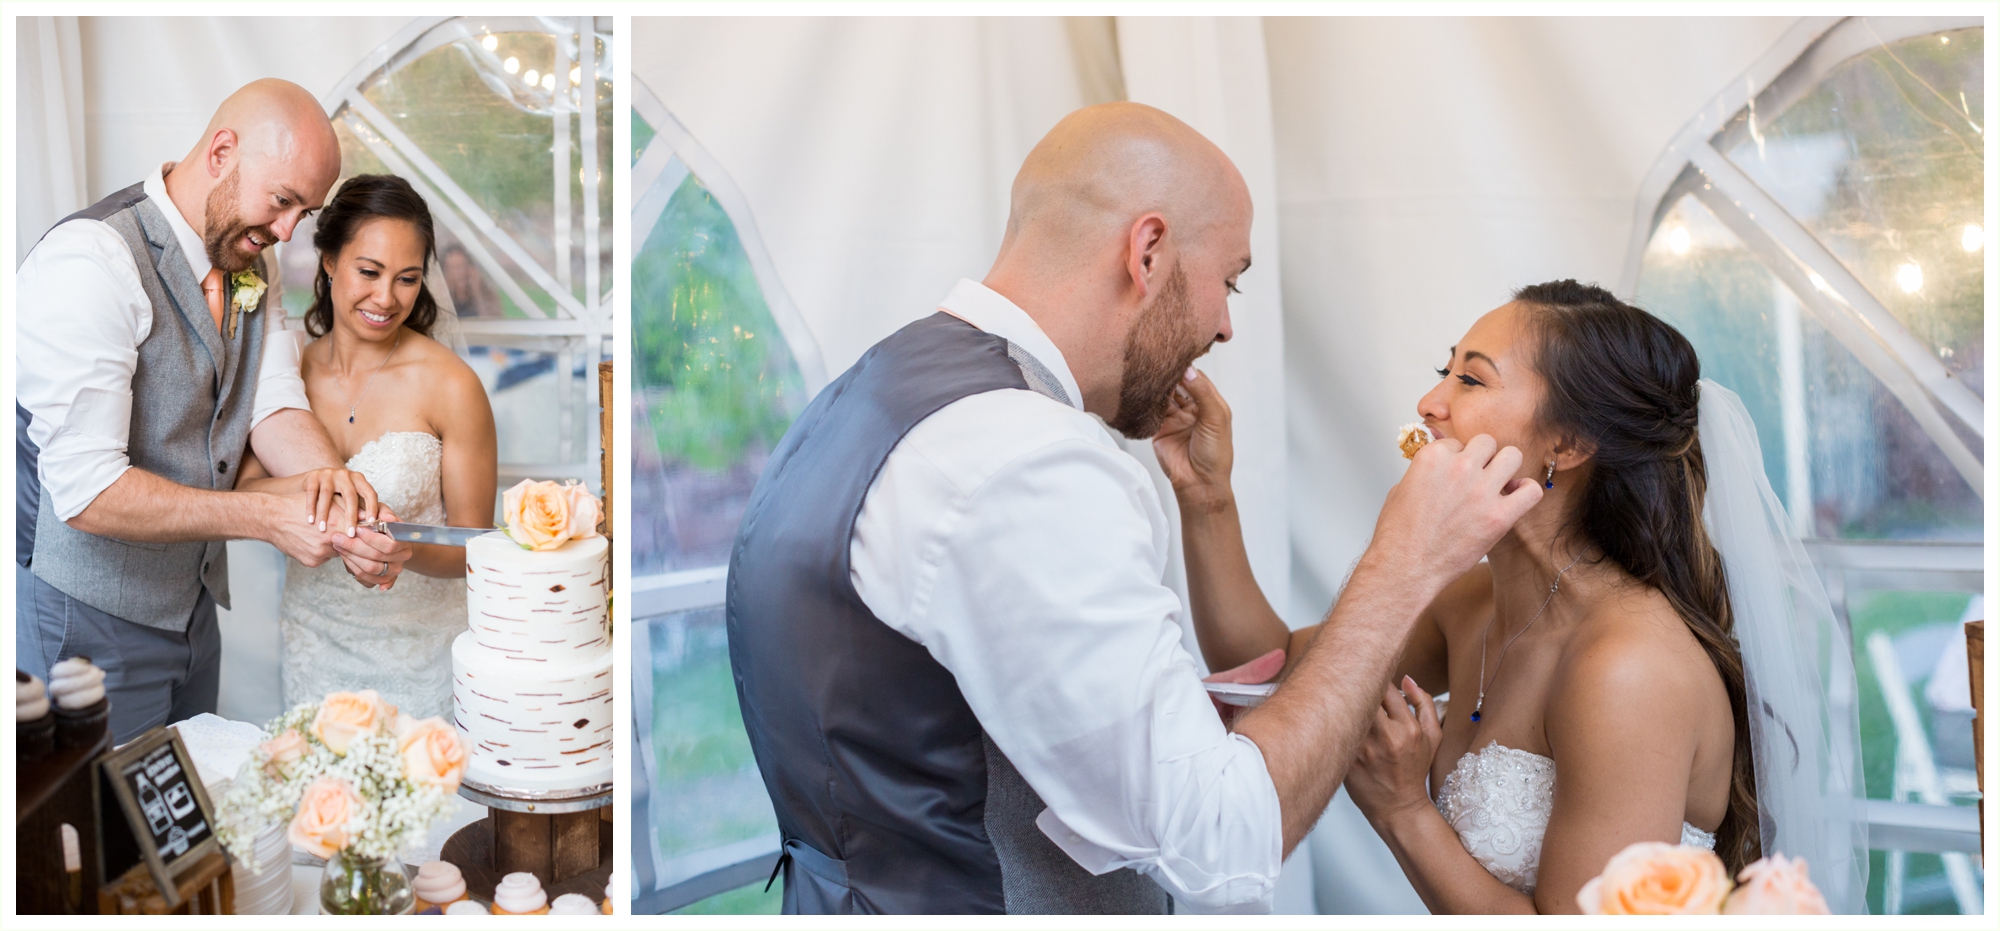 bride and groom cut cake and feed each other wedding reception